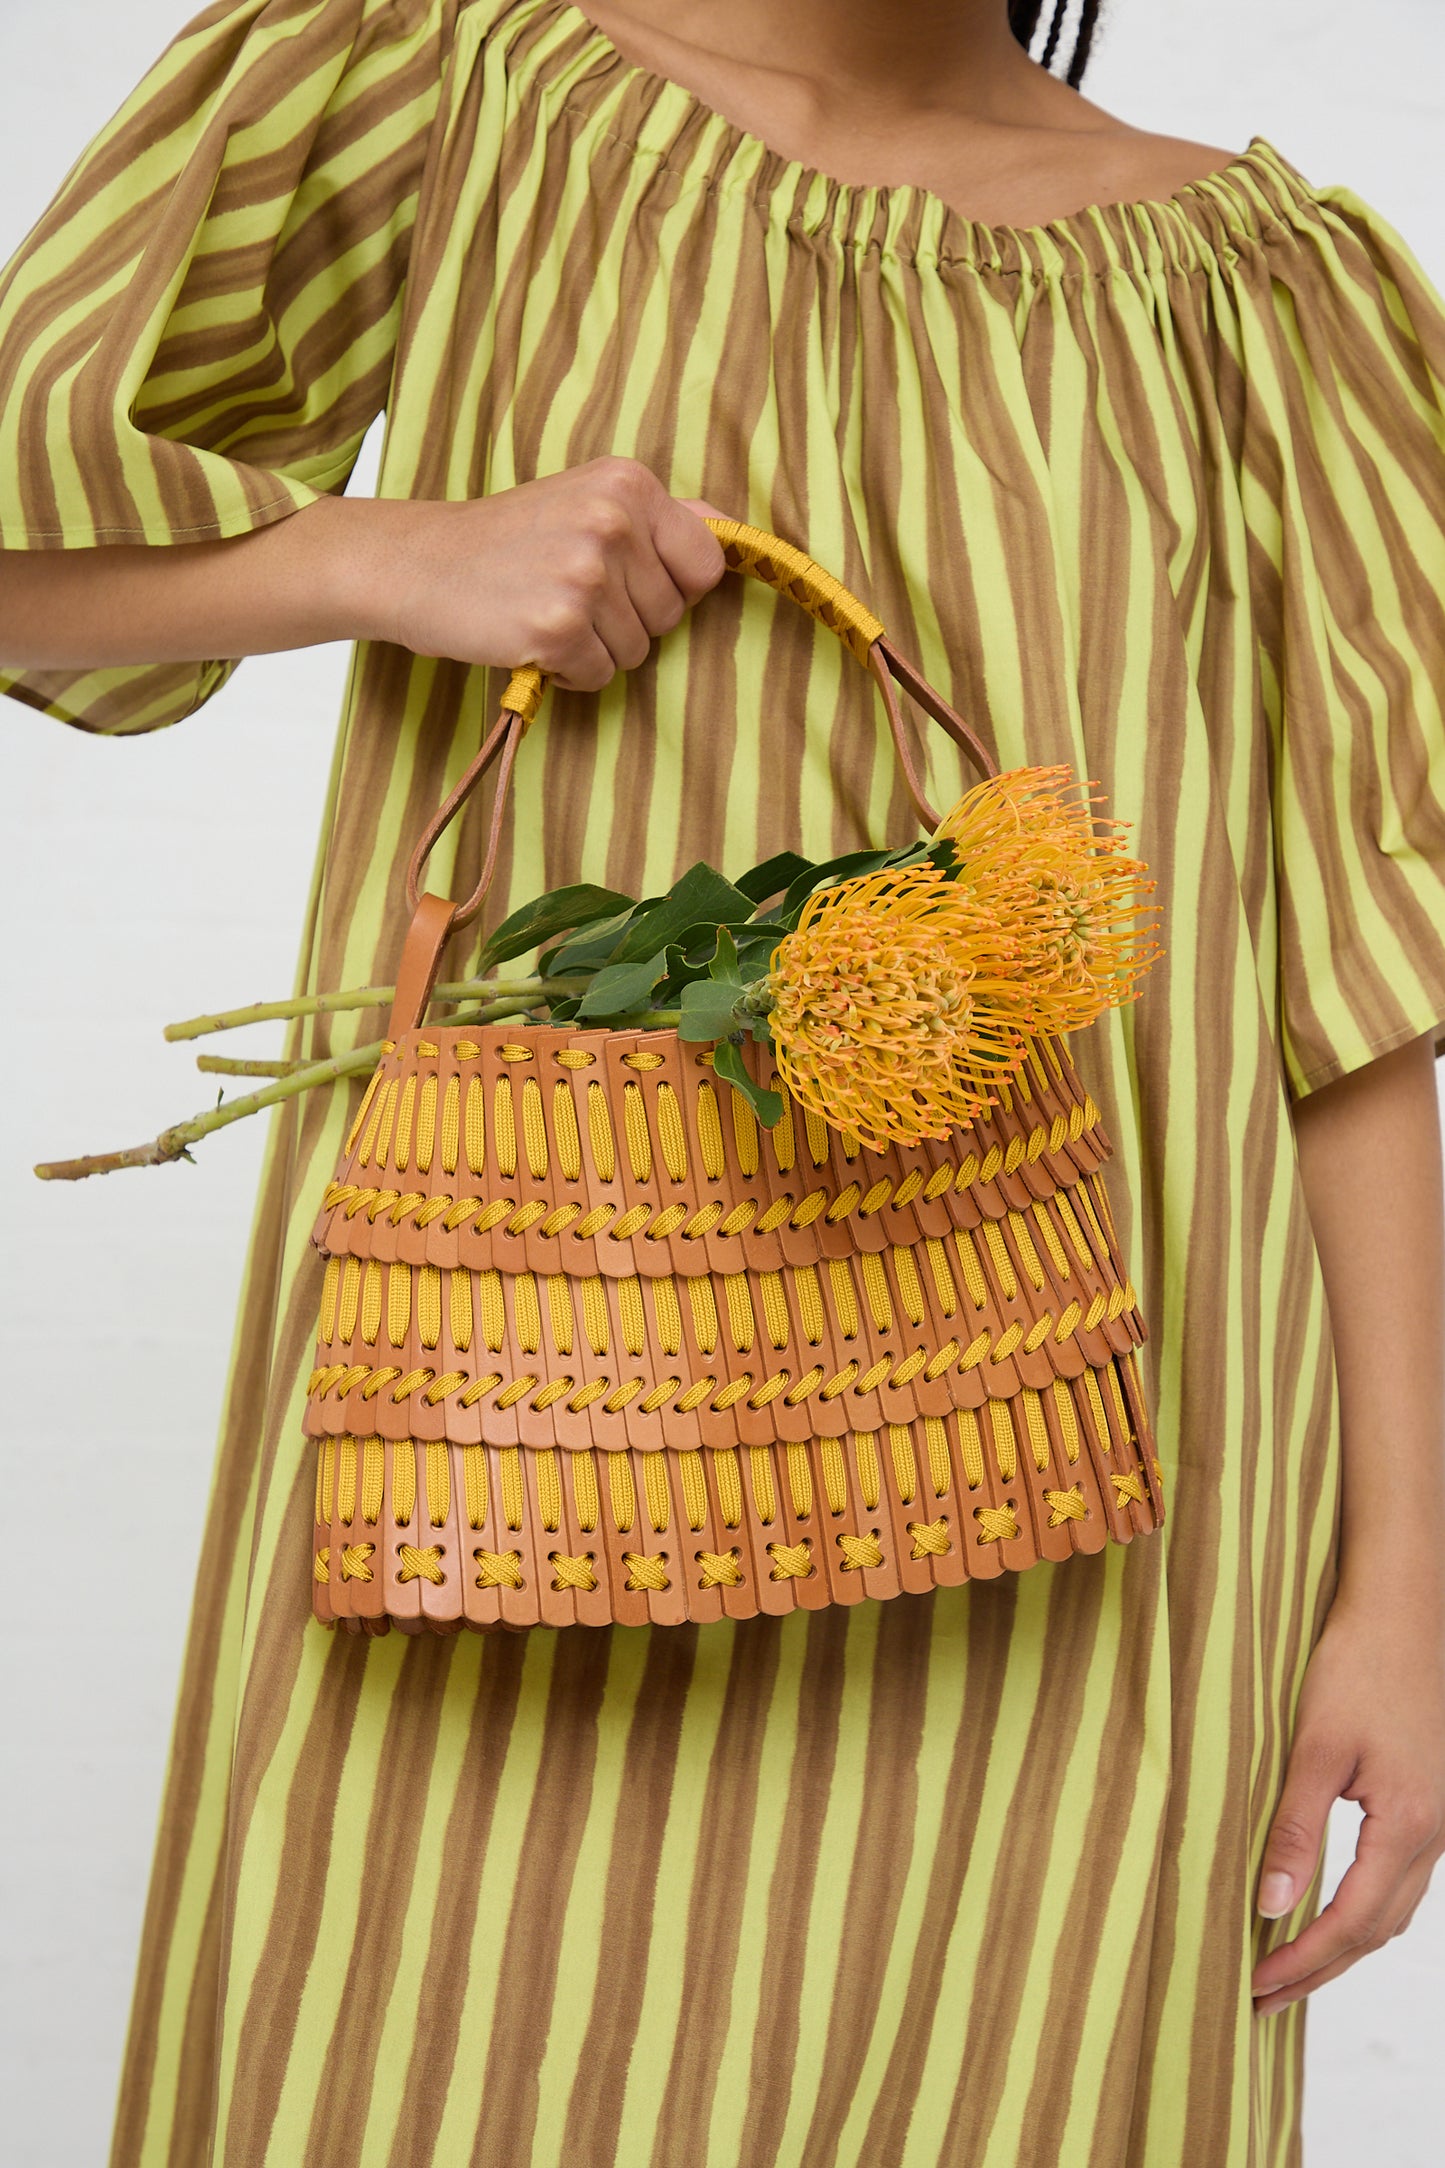 Woman holding a Hatori Basket Bag 168 in Tan and Yellow with yellow flowers against a striped dress background.